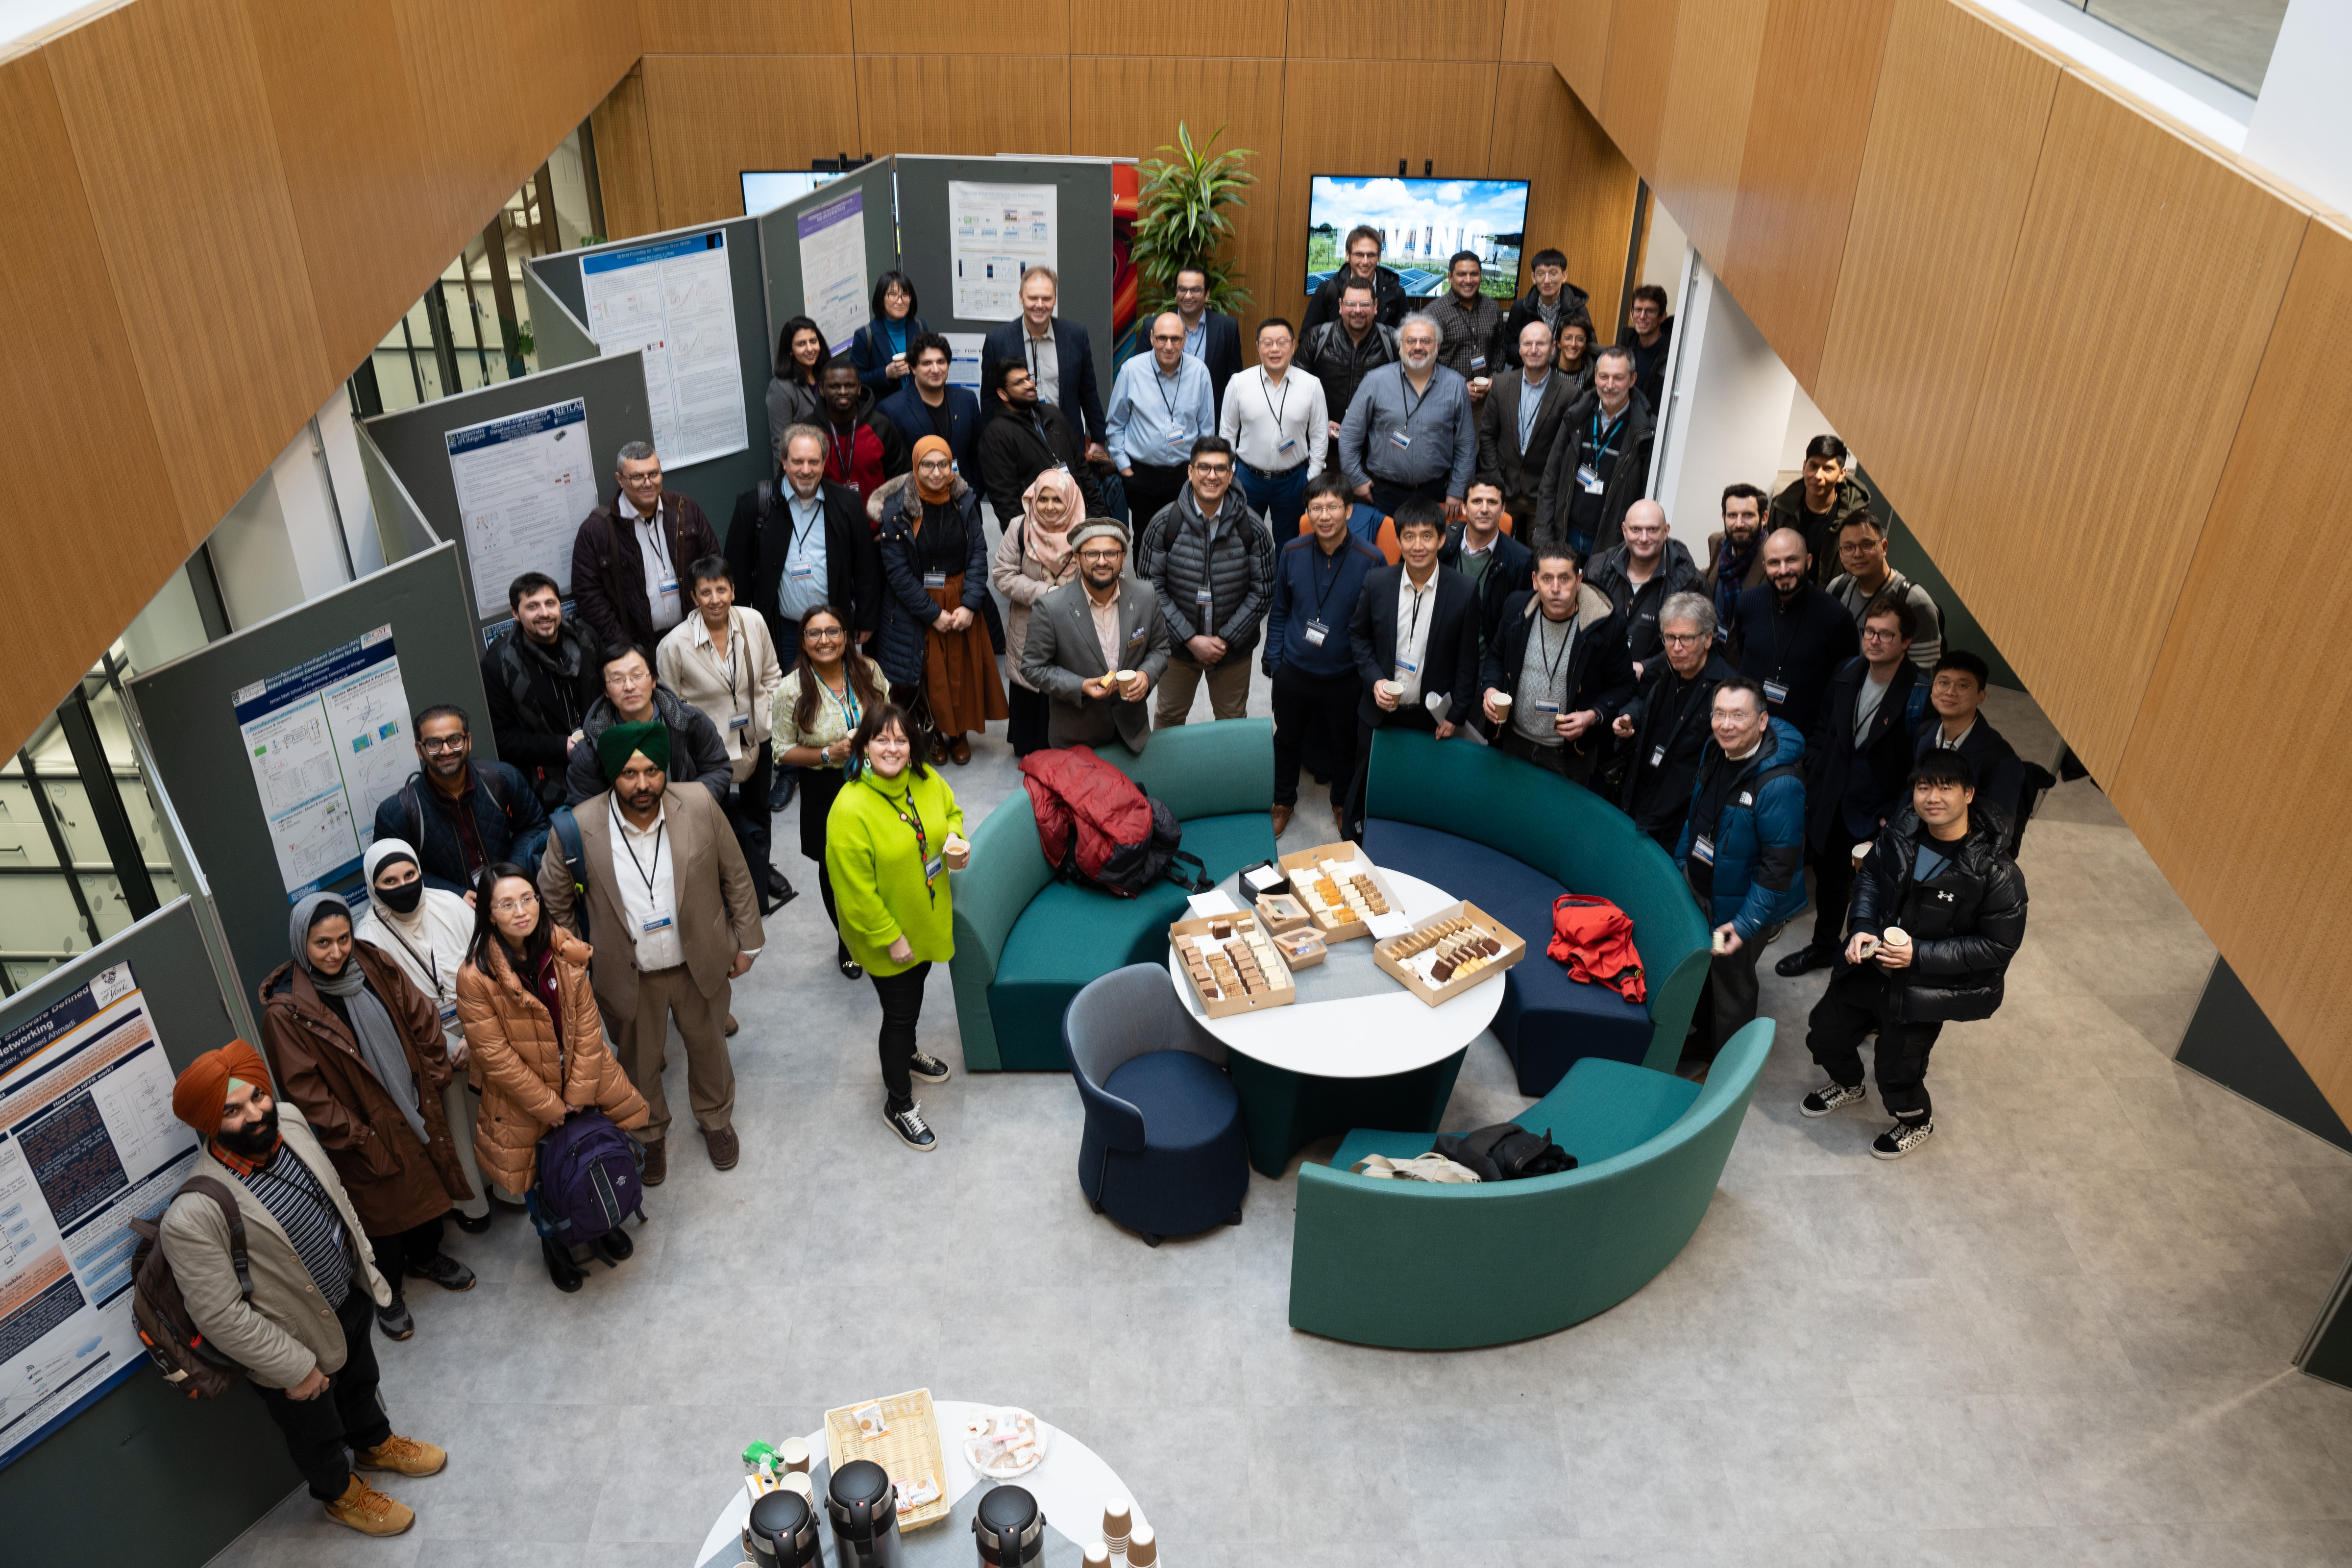 CHEDDAR Hub group photo in the Institute for Safe Autonomy